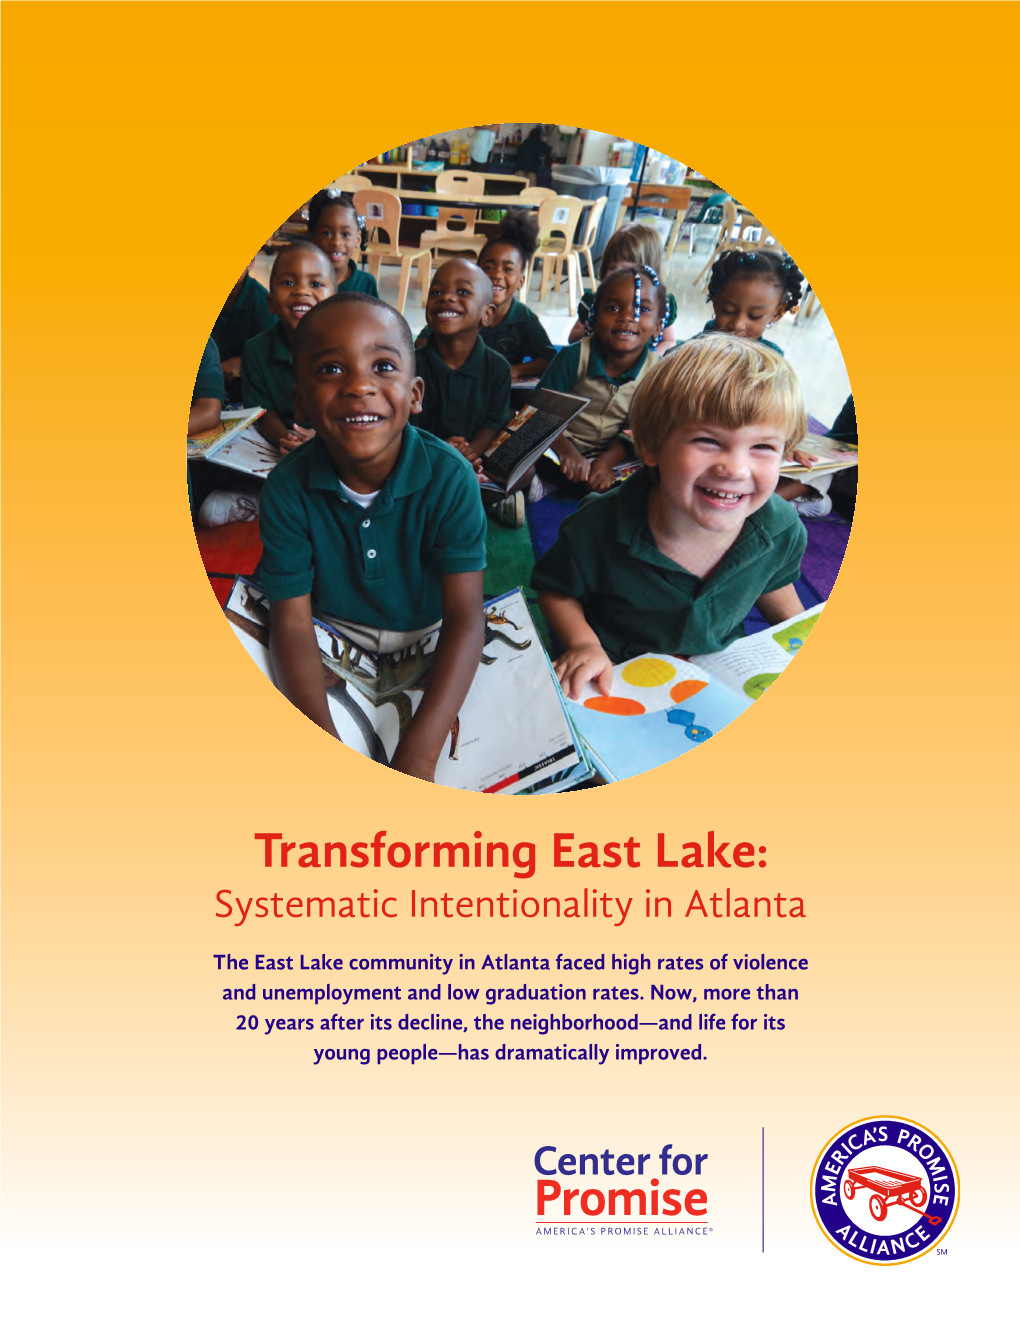 Transforming East Lake: Systematic Intentionality in Atlanta